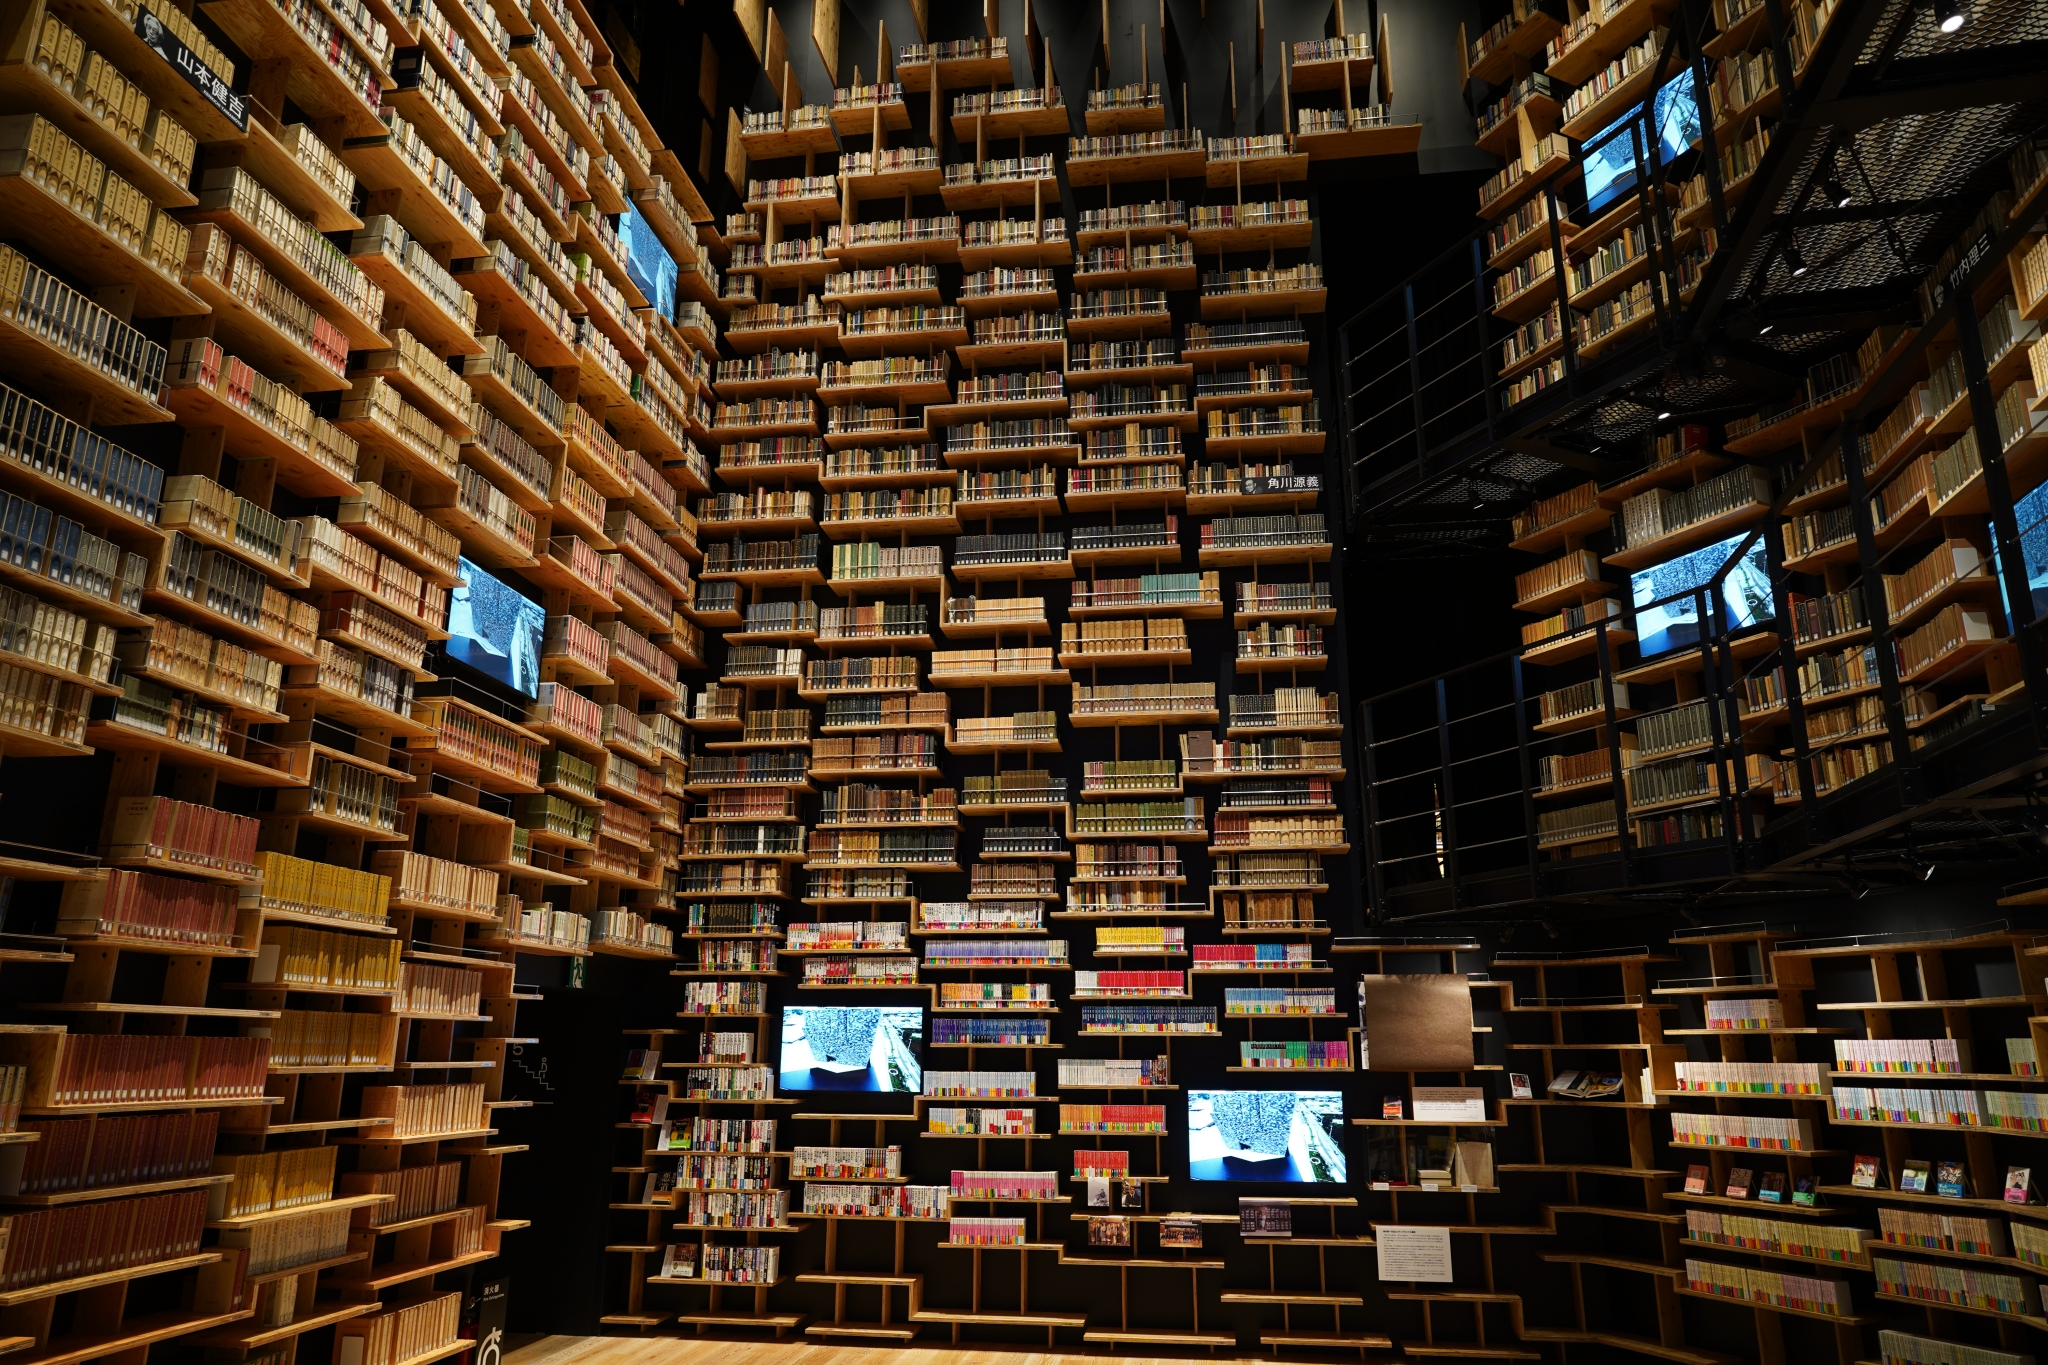 Large video library with tall ceiling and shelves stacked with tapes and screens